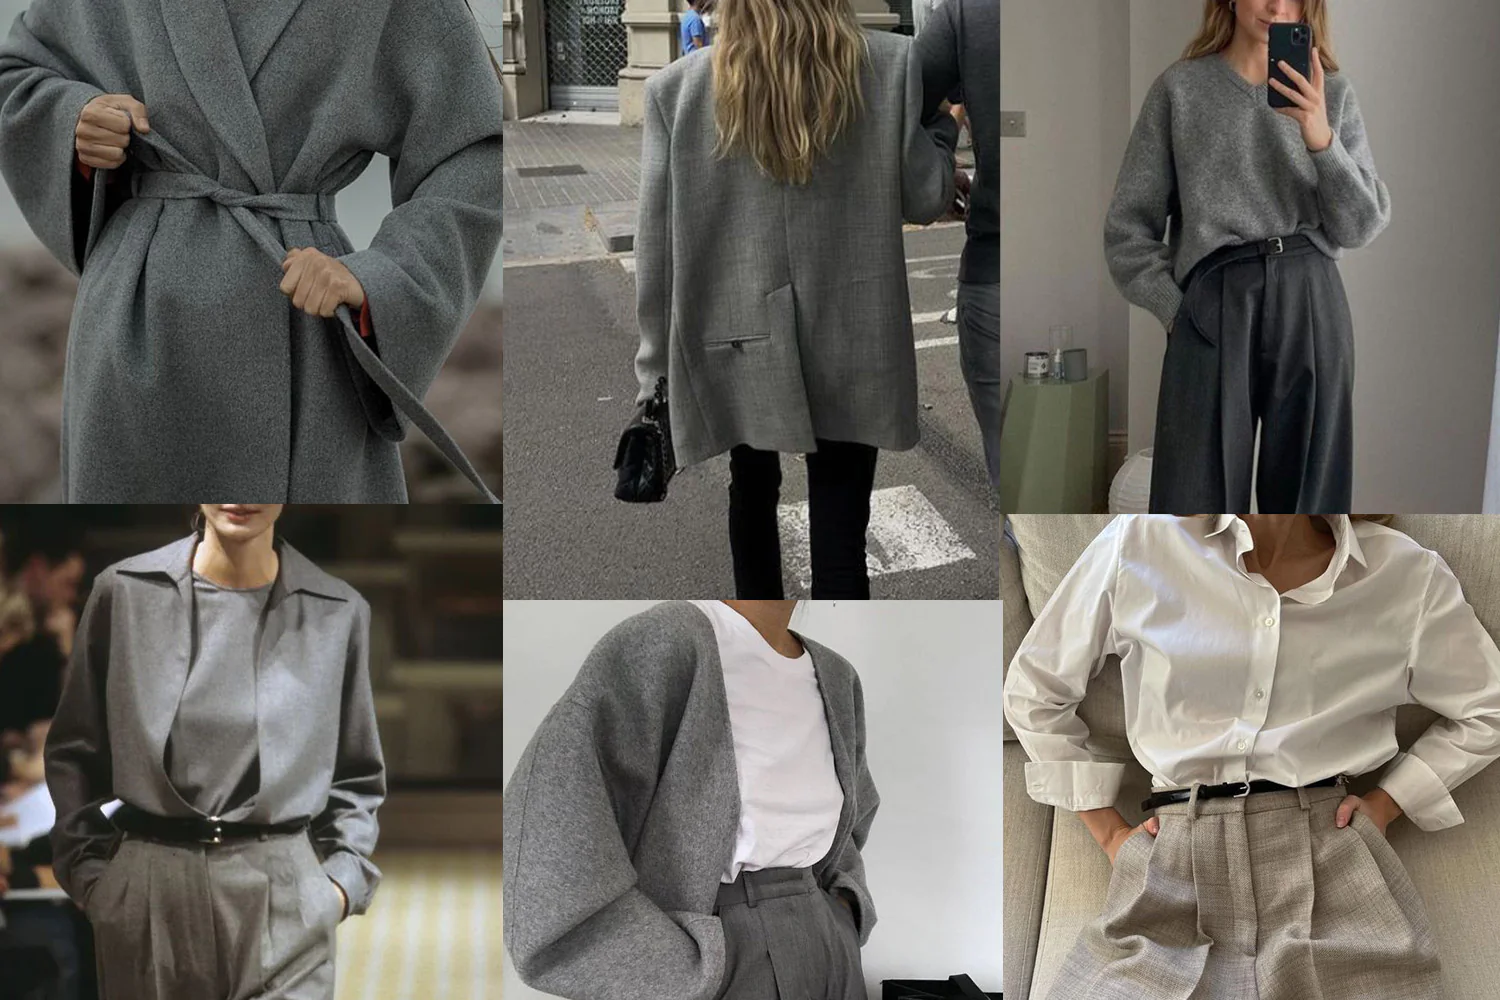 Mastering Minimalism: Your Guide to Creating a Capsule Wardrobe THE UNDONE GOING GREY HOW TO WEAR GREY TIMELESS CAPSULE WARDROBEBLOG MAIN IMAGE 03064aec 63ca 4533 a082 8d6a042335f7